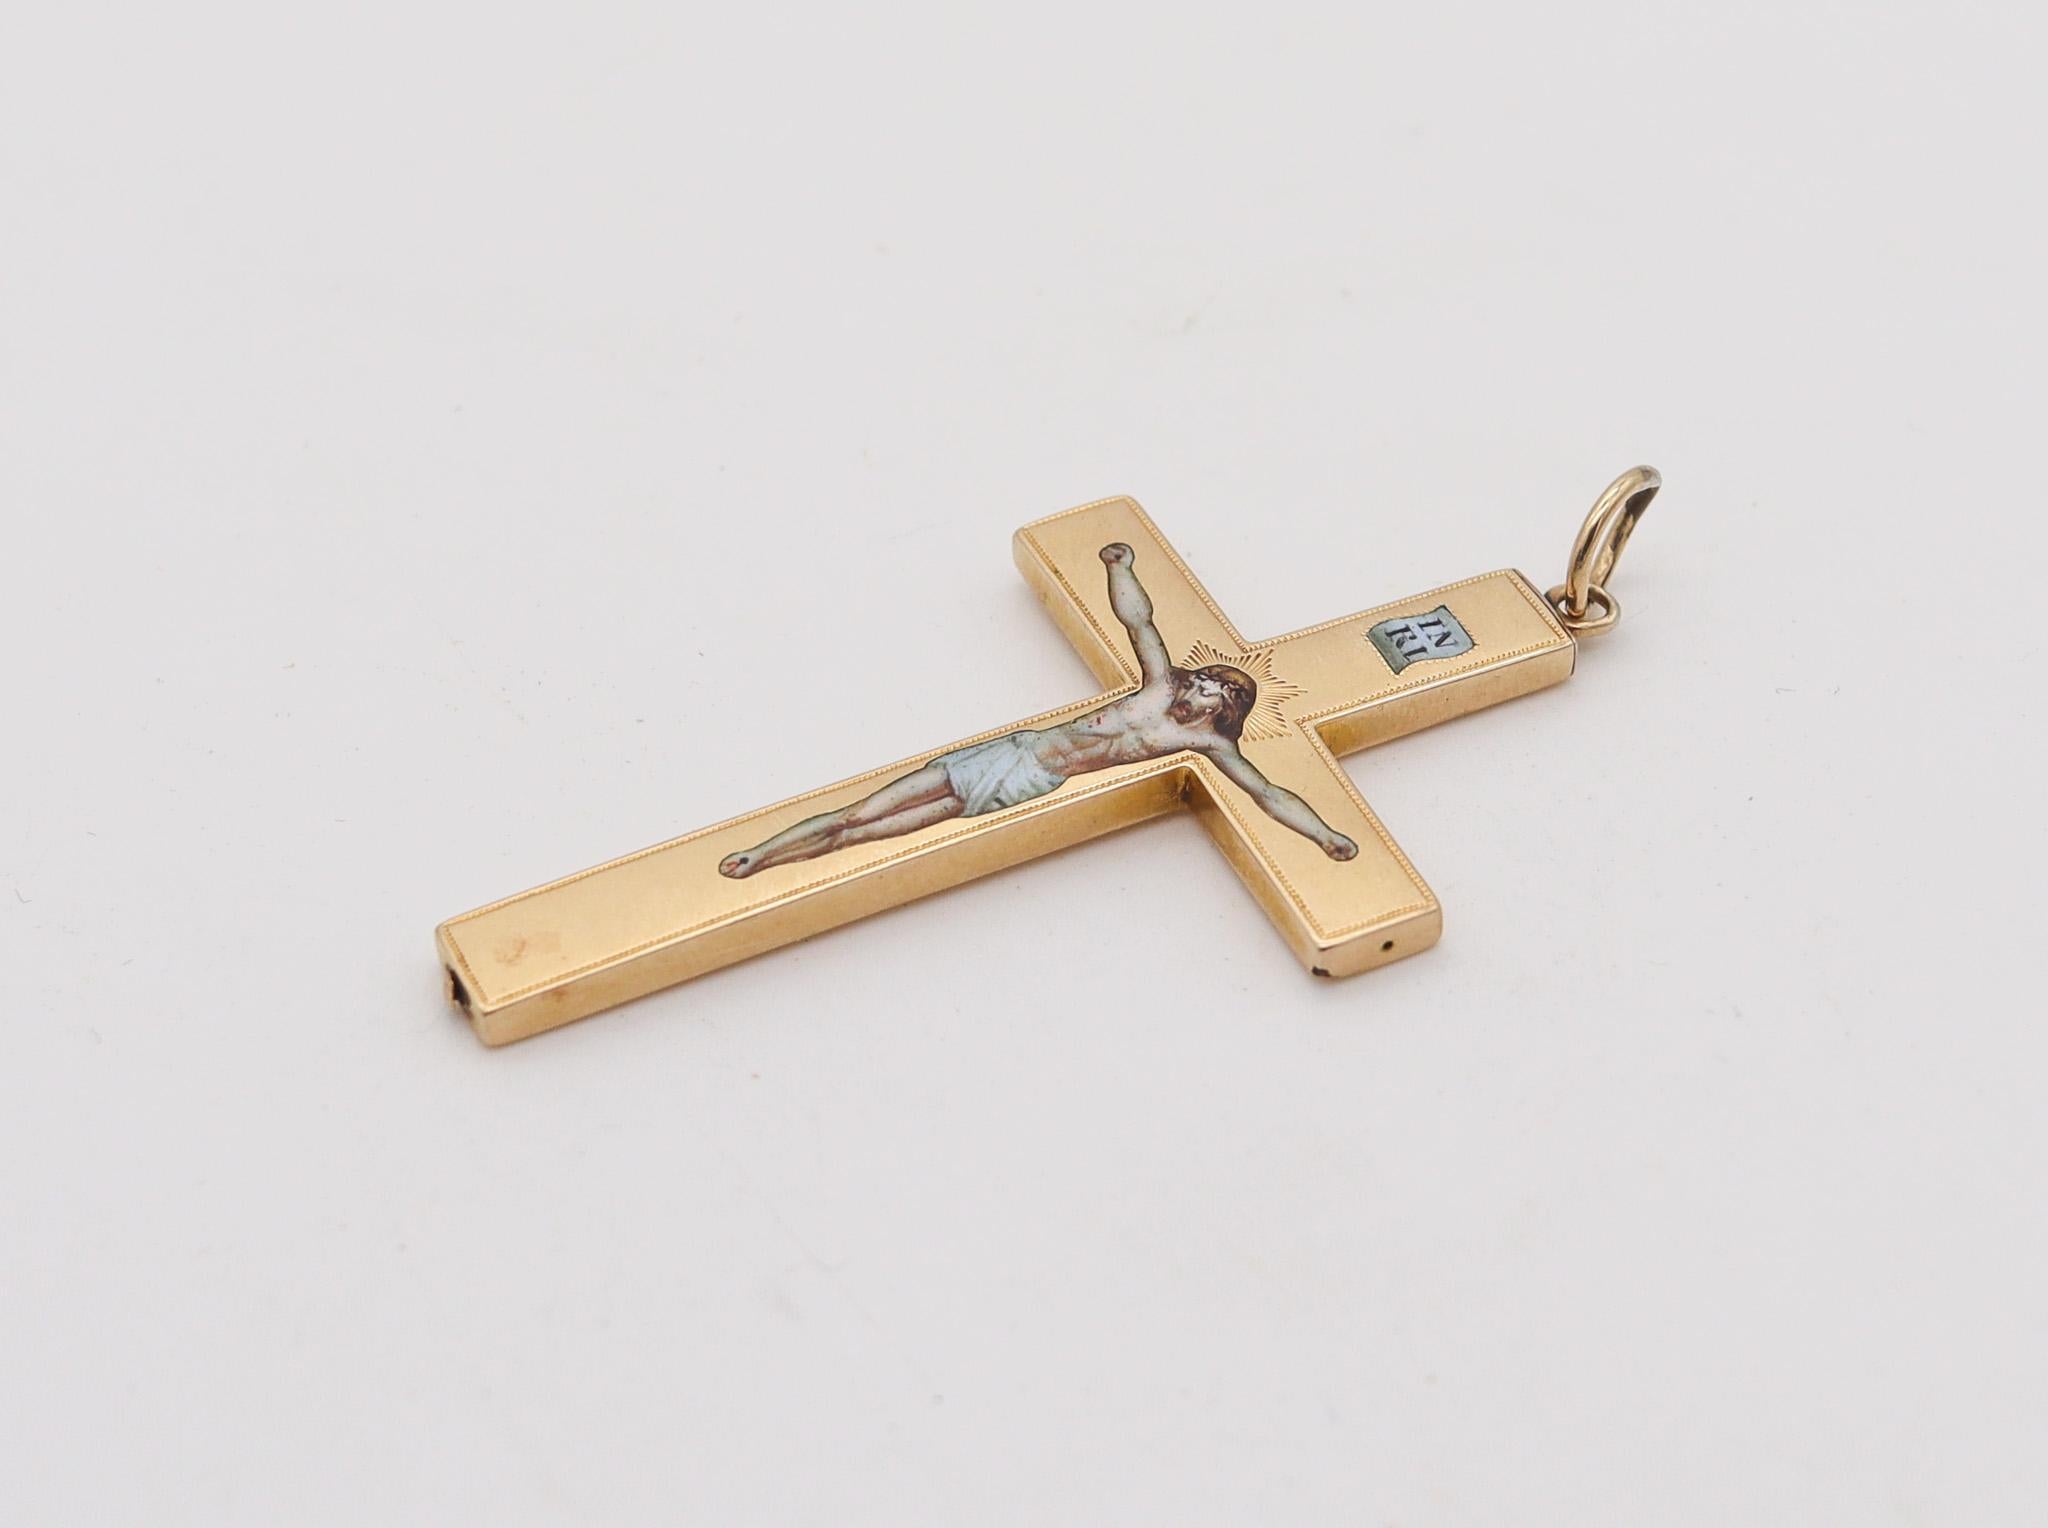 Byzantine revival enameled Cross

Fabulous antique cross, created in Europe in the middle of the 19th century, circa 1850. This exceptional rare cross has been crafted with Byzantine and renaissance revival patterns in solid yellow gold of 18 karats